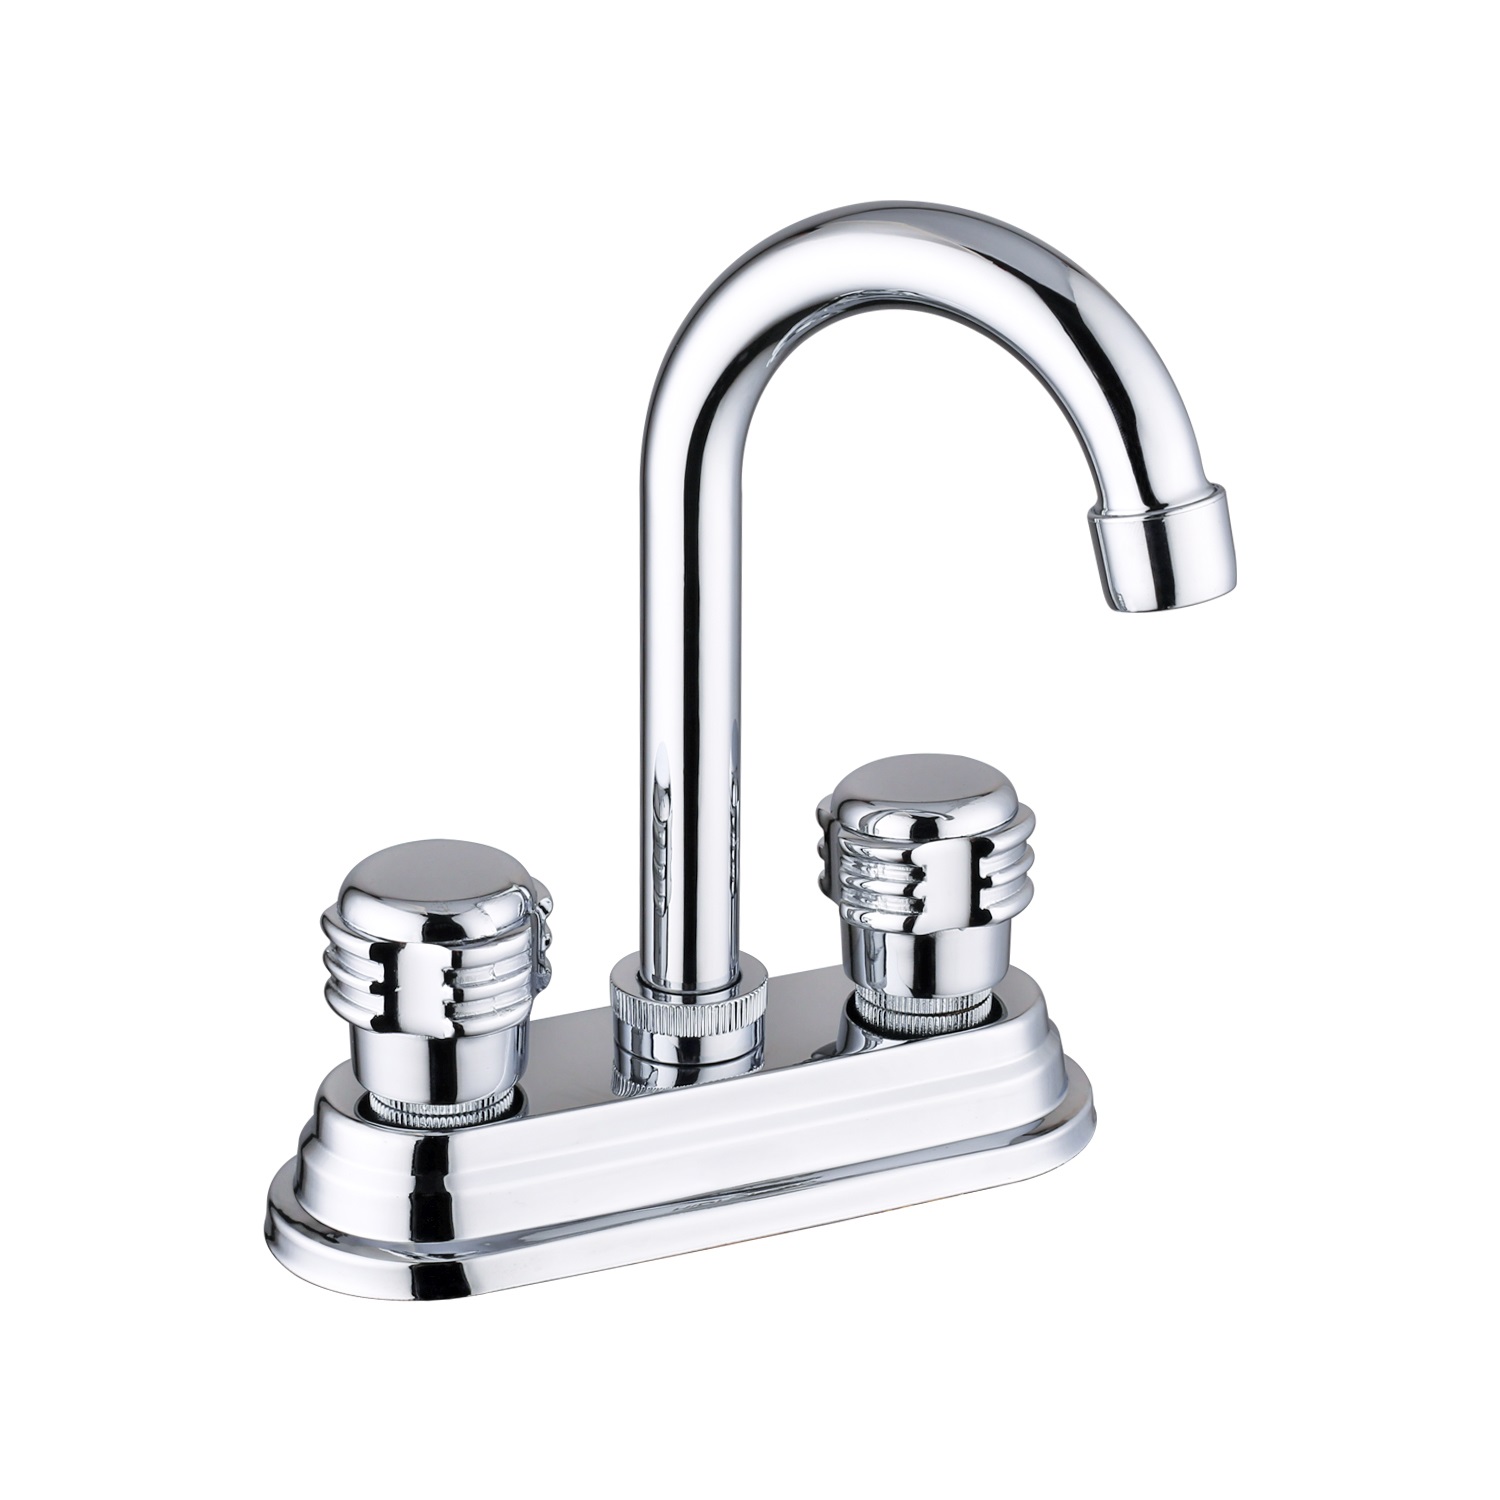 High Quality Silver Plating South Amercian style 4 inch Sink mixer, Cold&Hot water Basin faucet